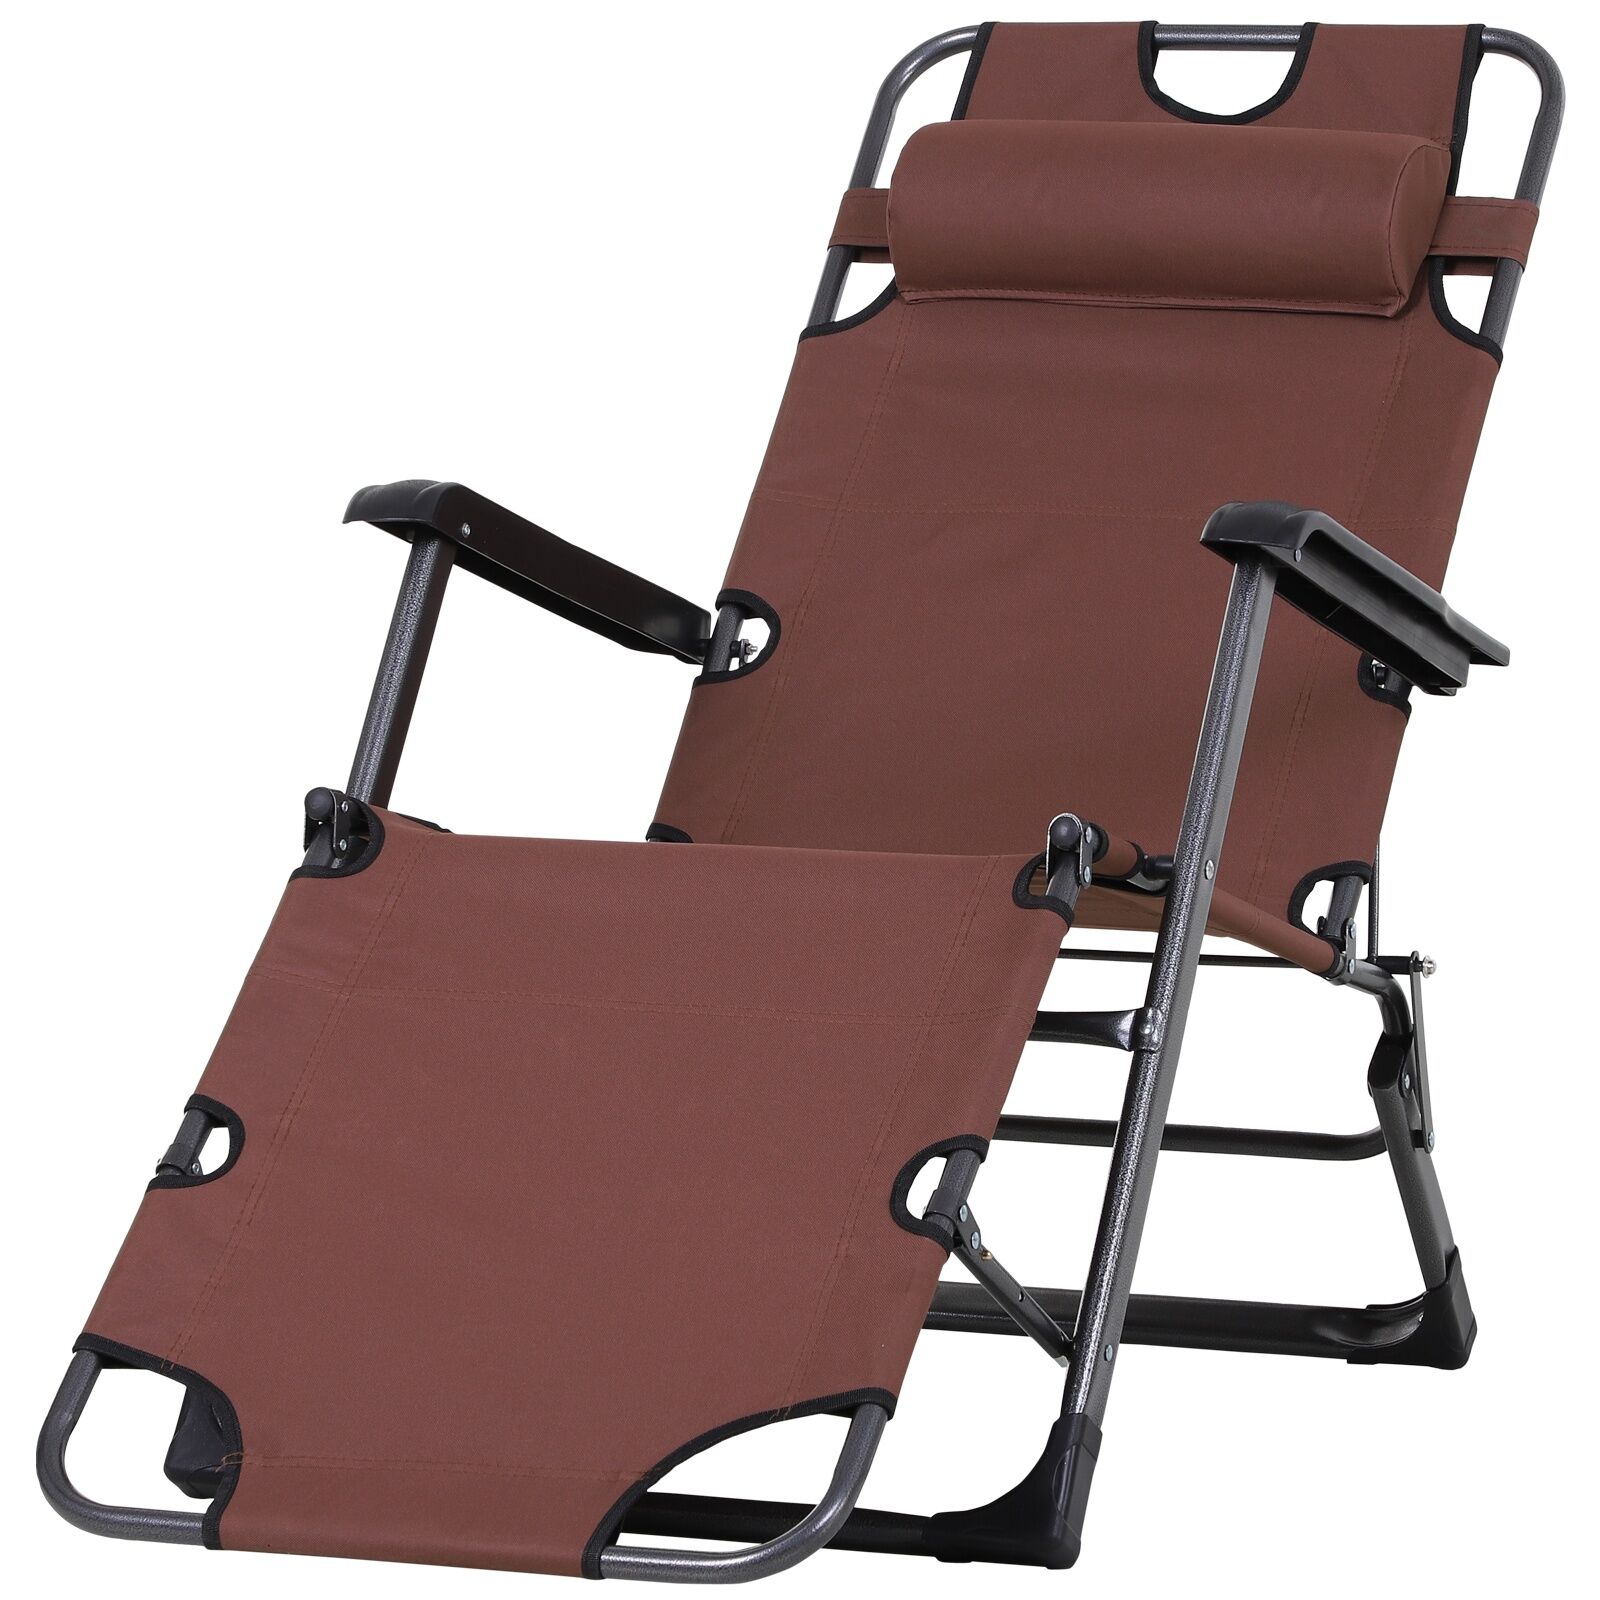 Outsunny Folding Lounger Chair Metal Frame Outdoor Pool Sun Lounger Curved Reclining Chair 120° / 180° W/ Head Pillow Brown